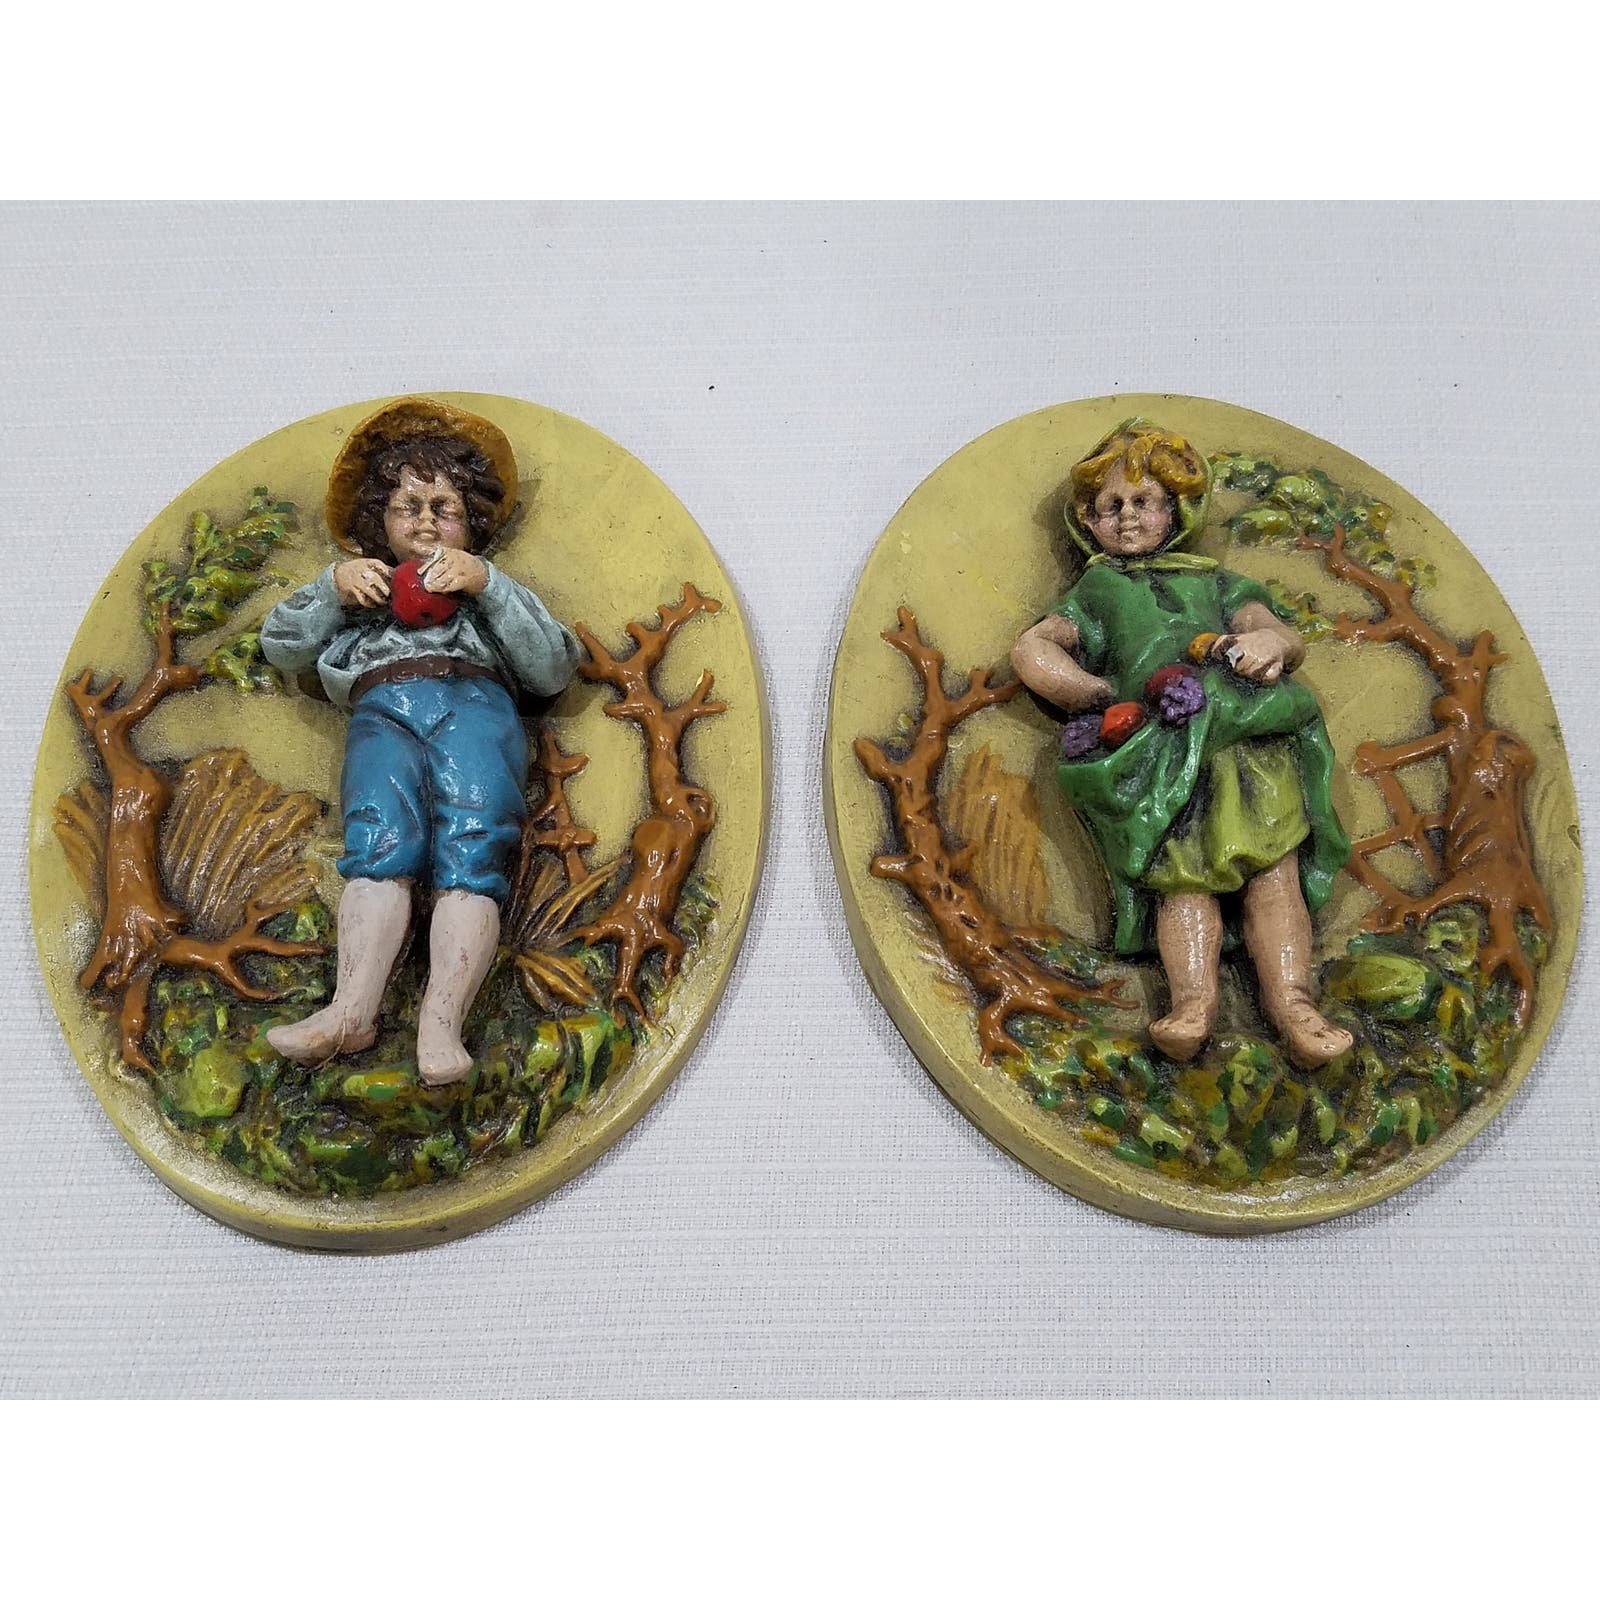 Vintage Little Boy and Girl in Vineyard Plaster Relief Plaques lAaE4OTY9